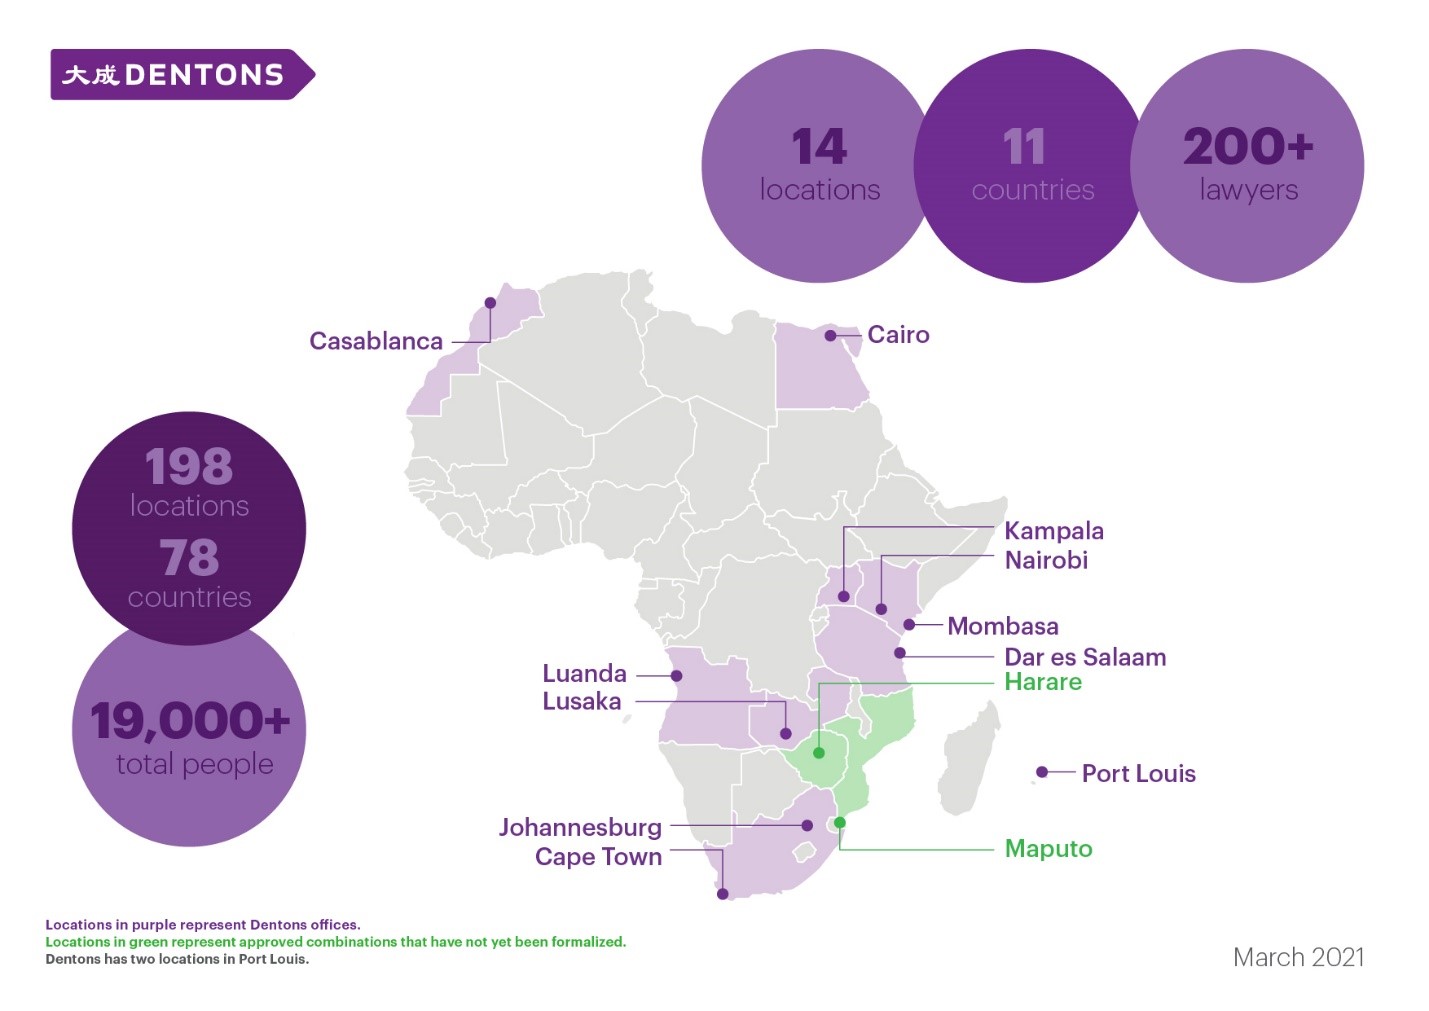 Dentons presence in Africa in March 2021